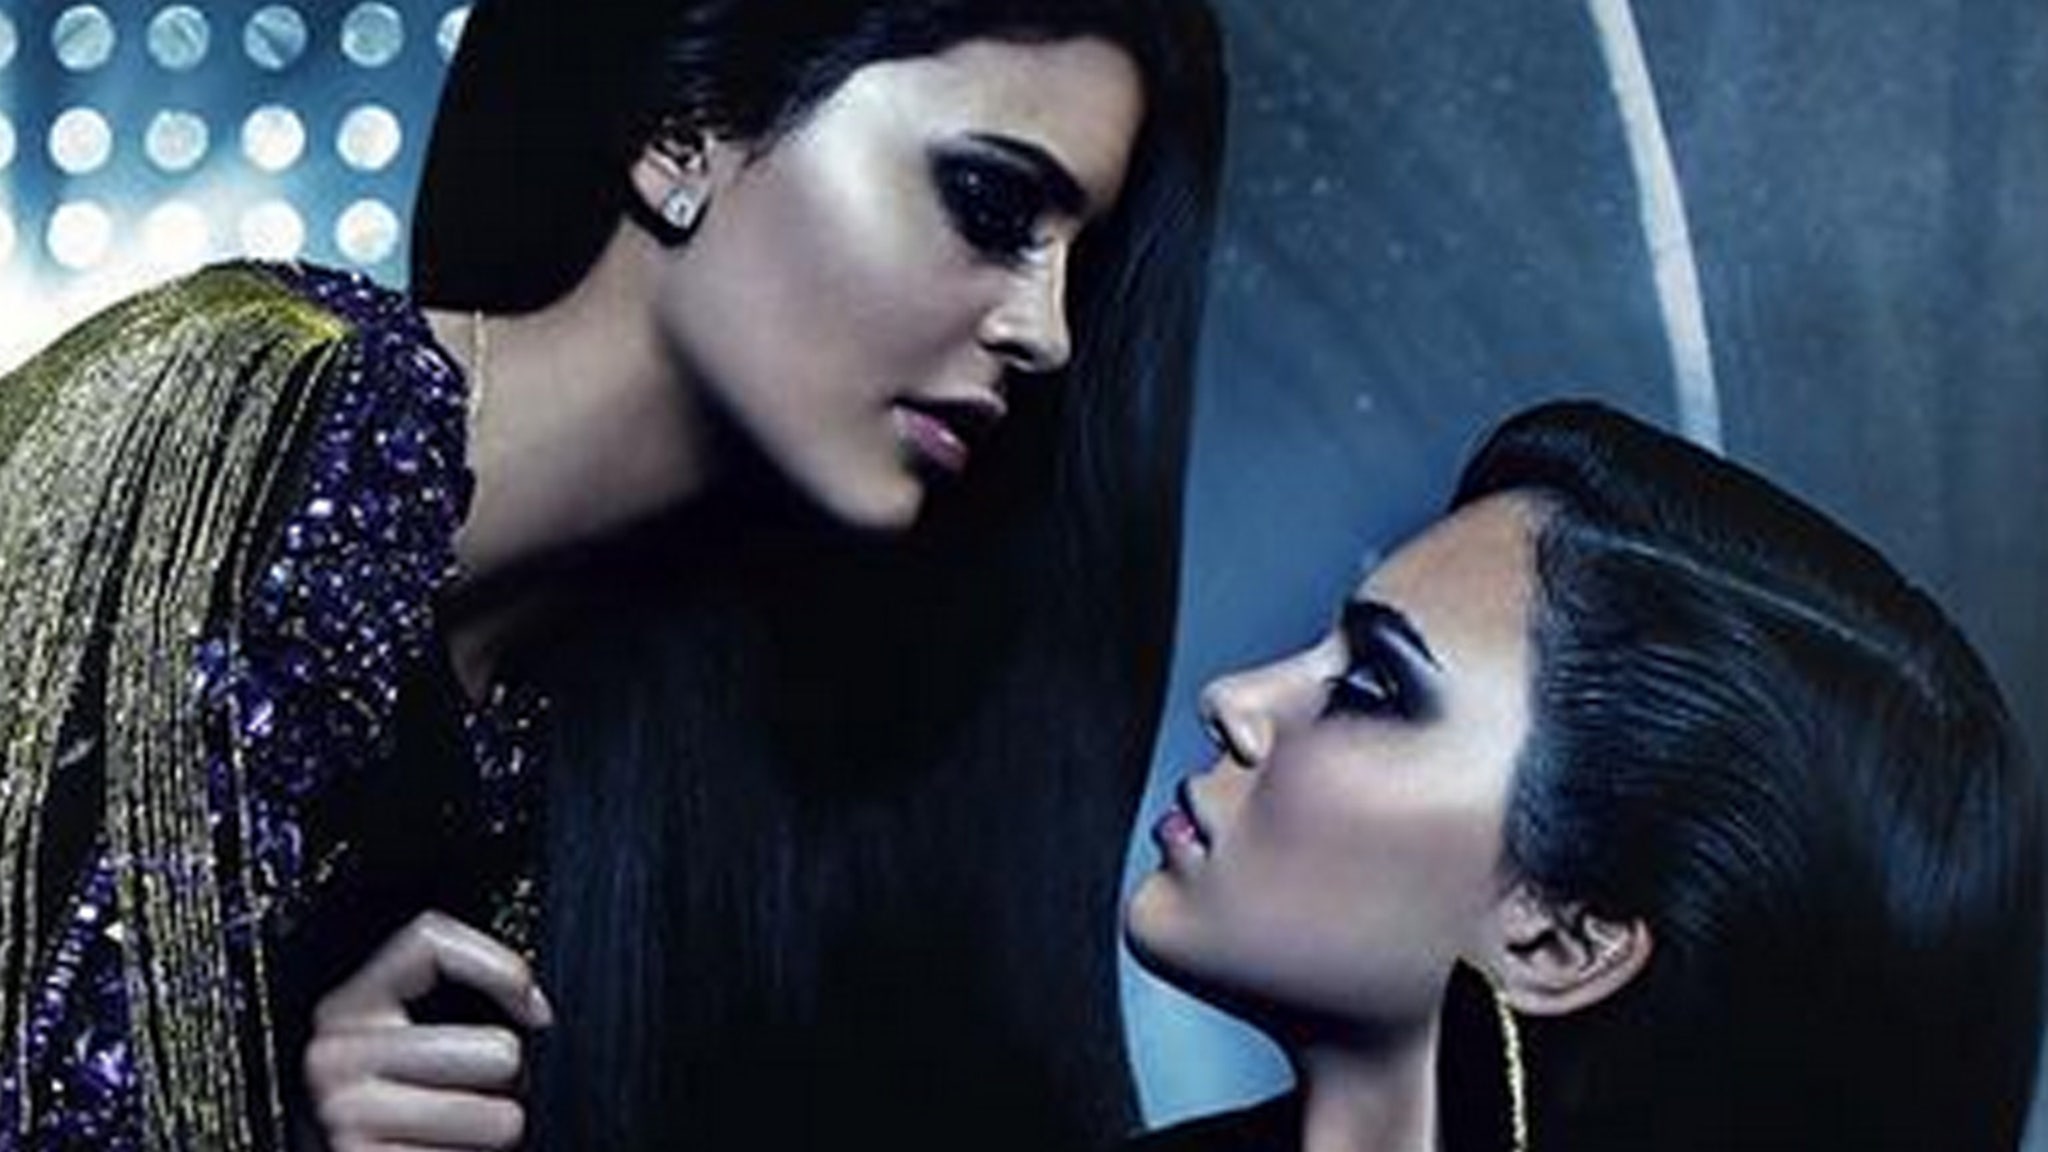 Kendall And Kylie Jenner Almost Kiss In Seductive Campaign For Balmain